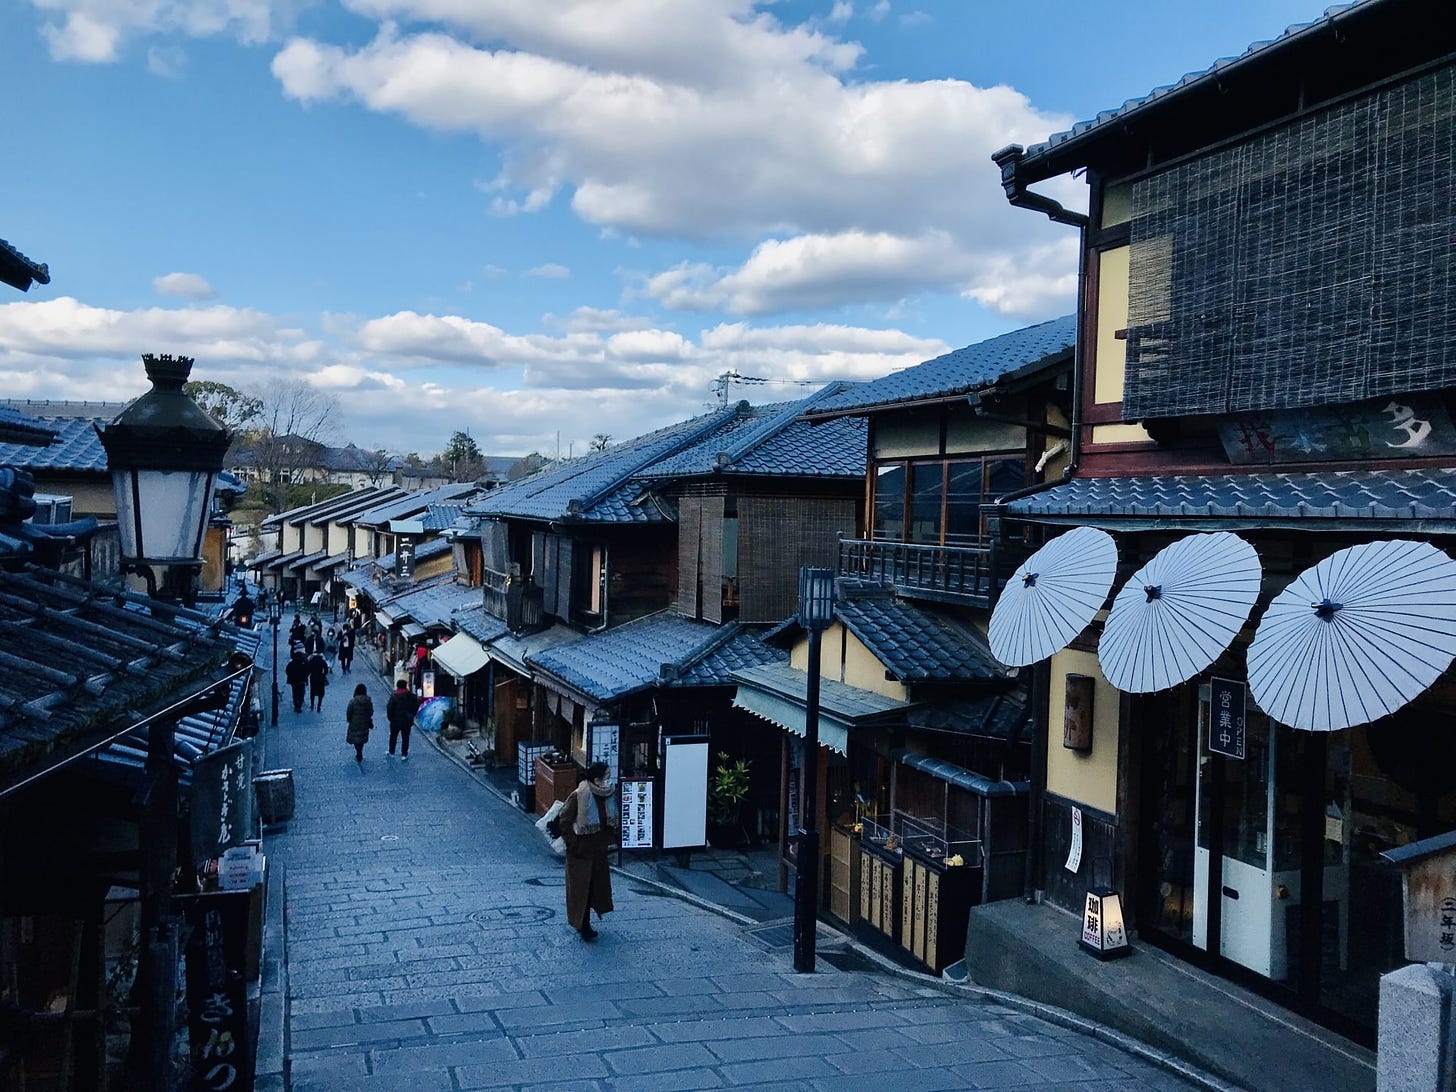 A historical alley in Kyoto